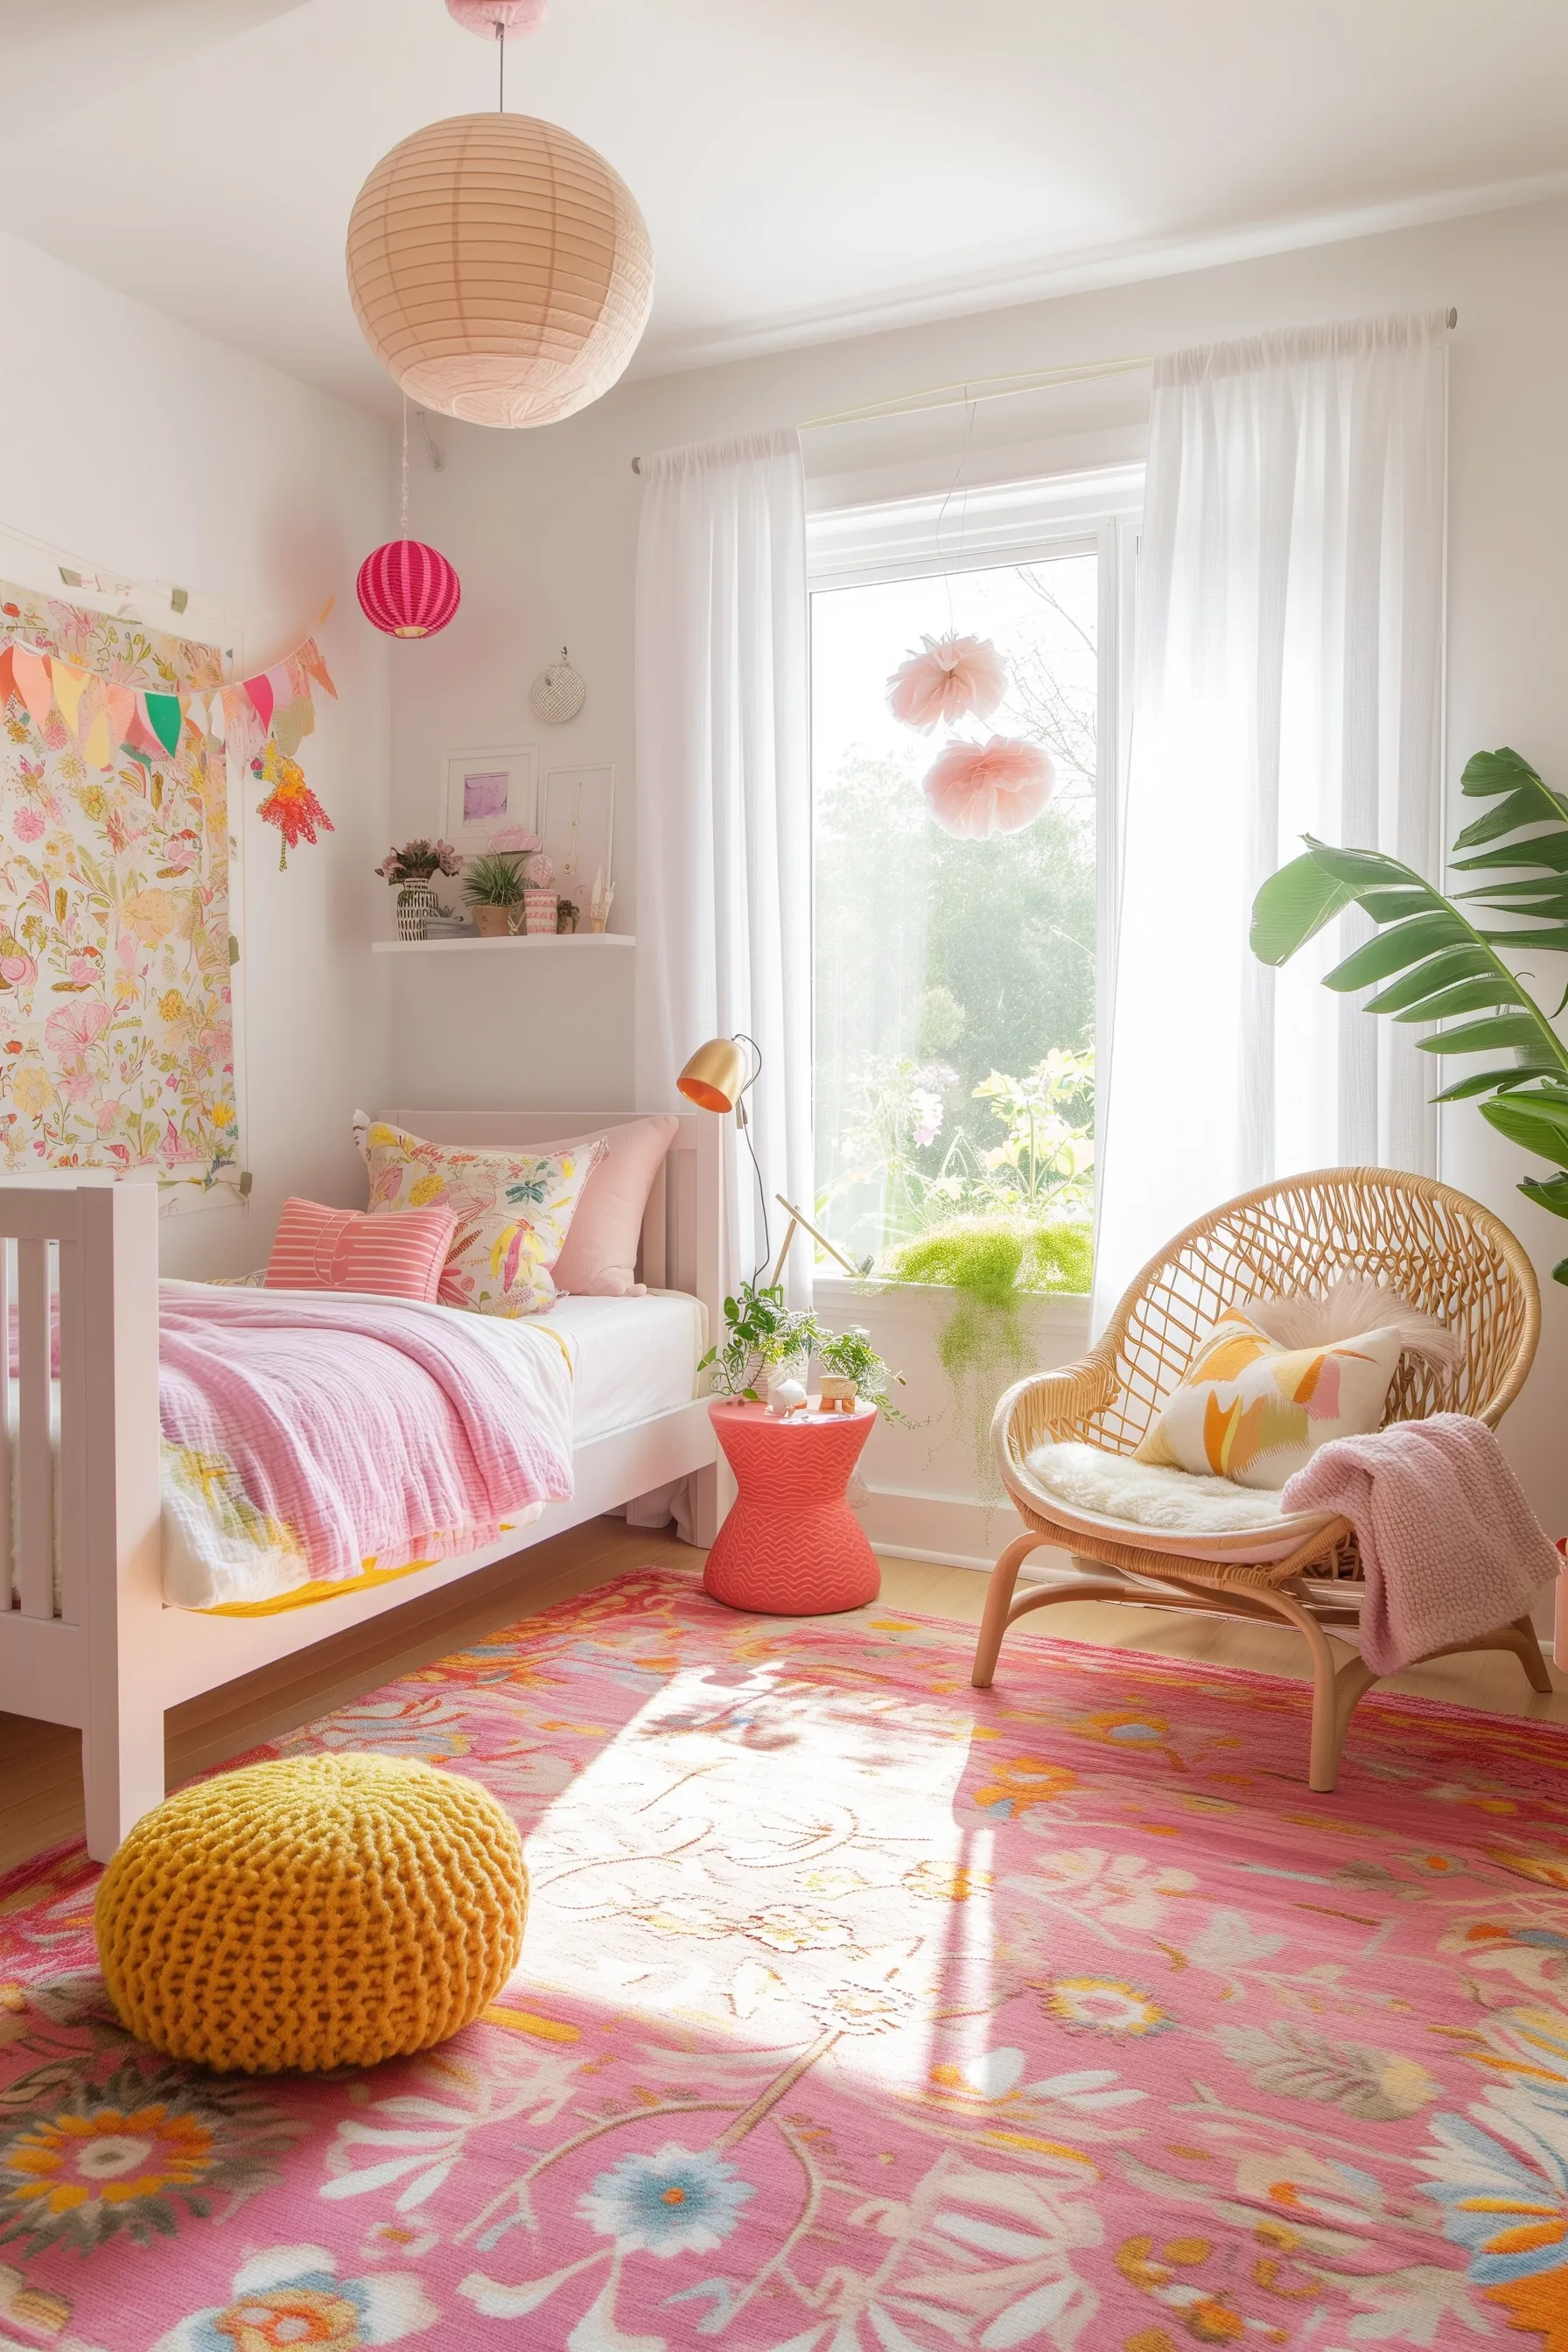 A colorful orange and pink bedroom